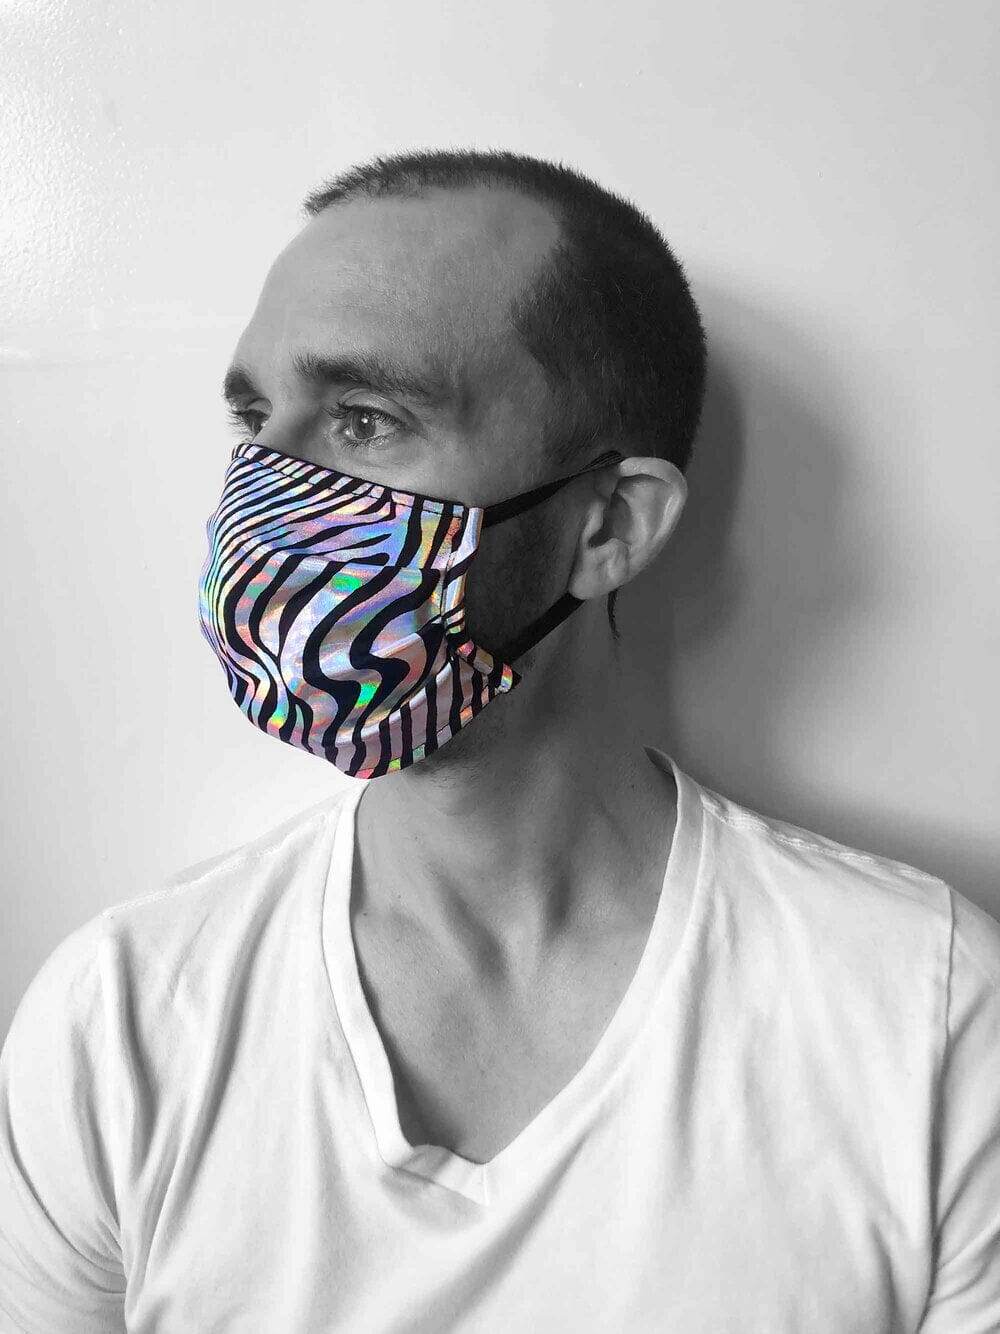 Zebra Print Holographic Face Mask by Love Khaos